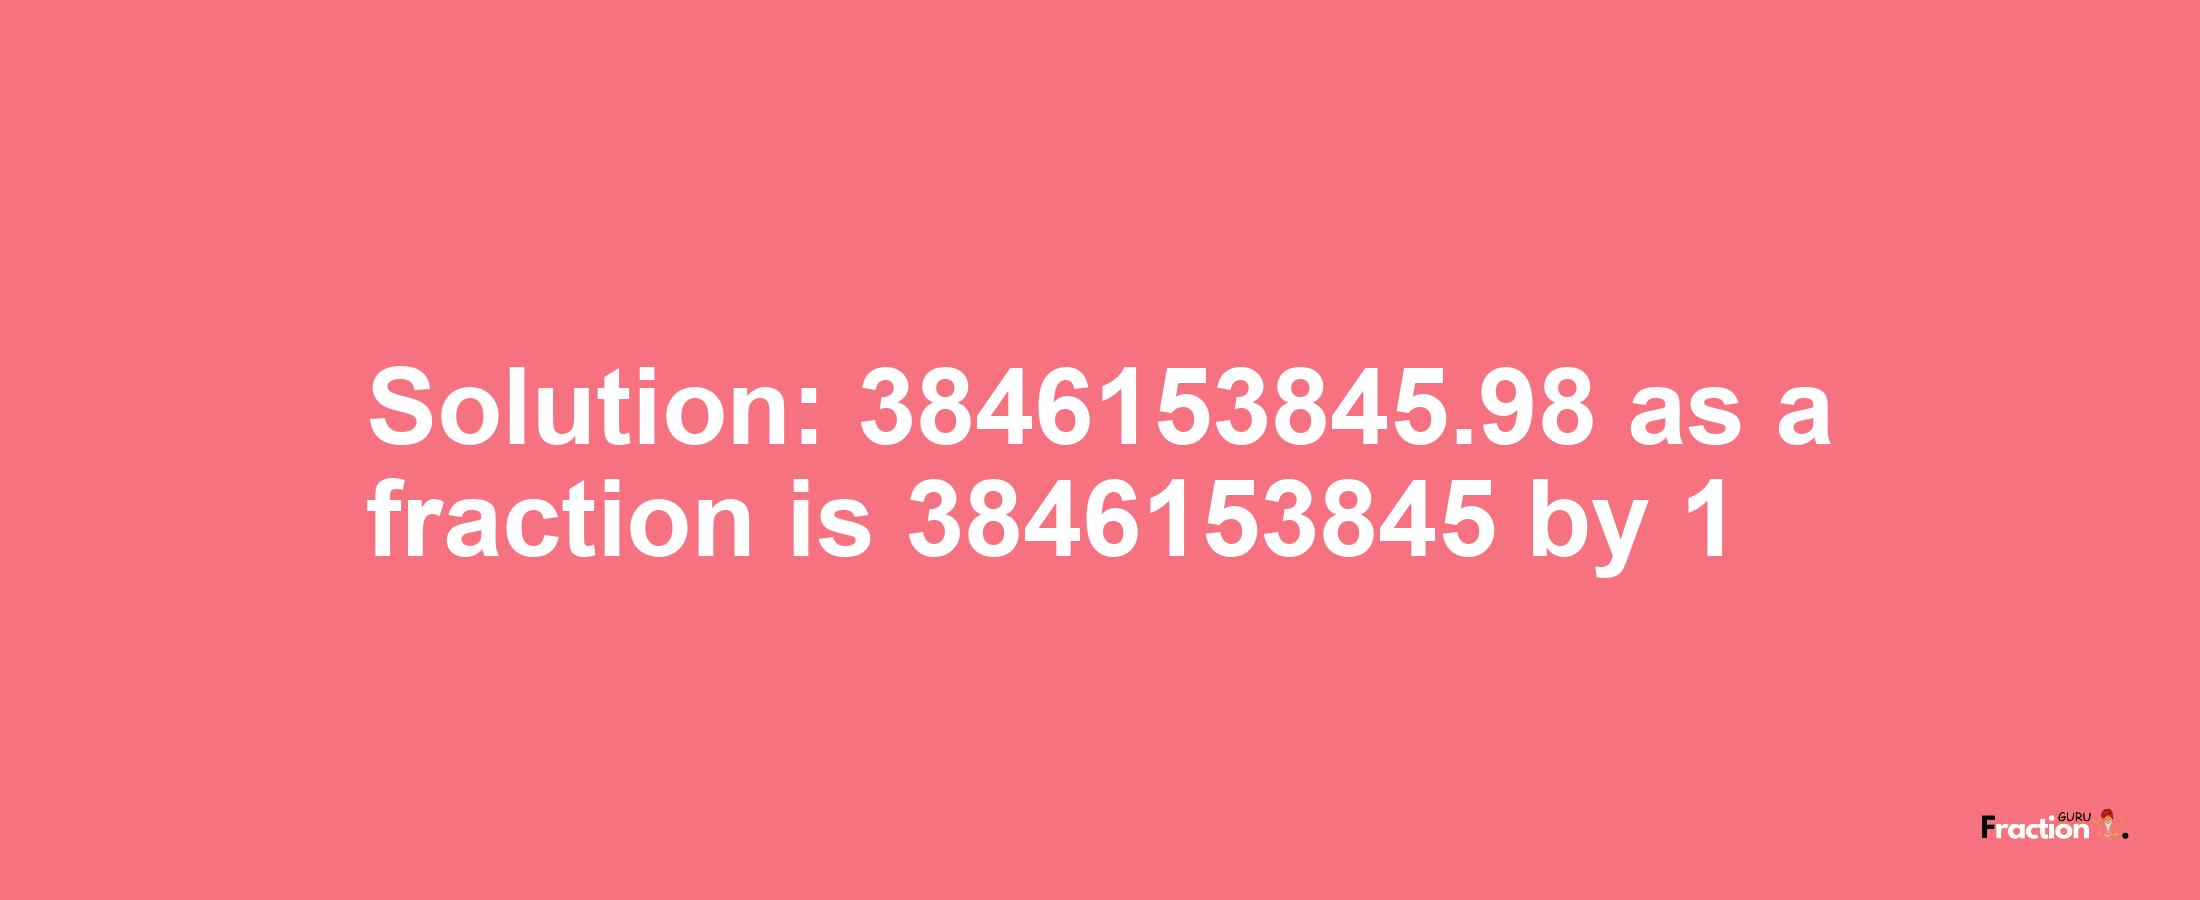 Solution:3846153845.98 as a fraction is 3846153845/1